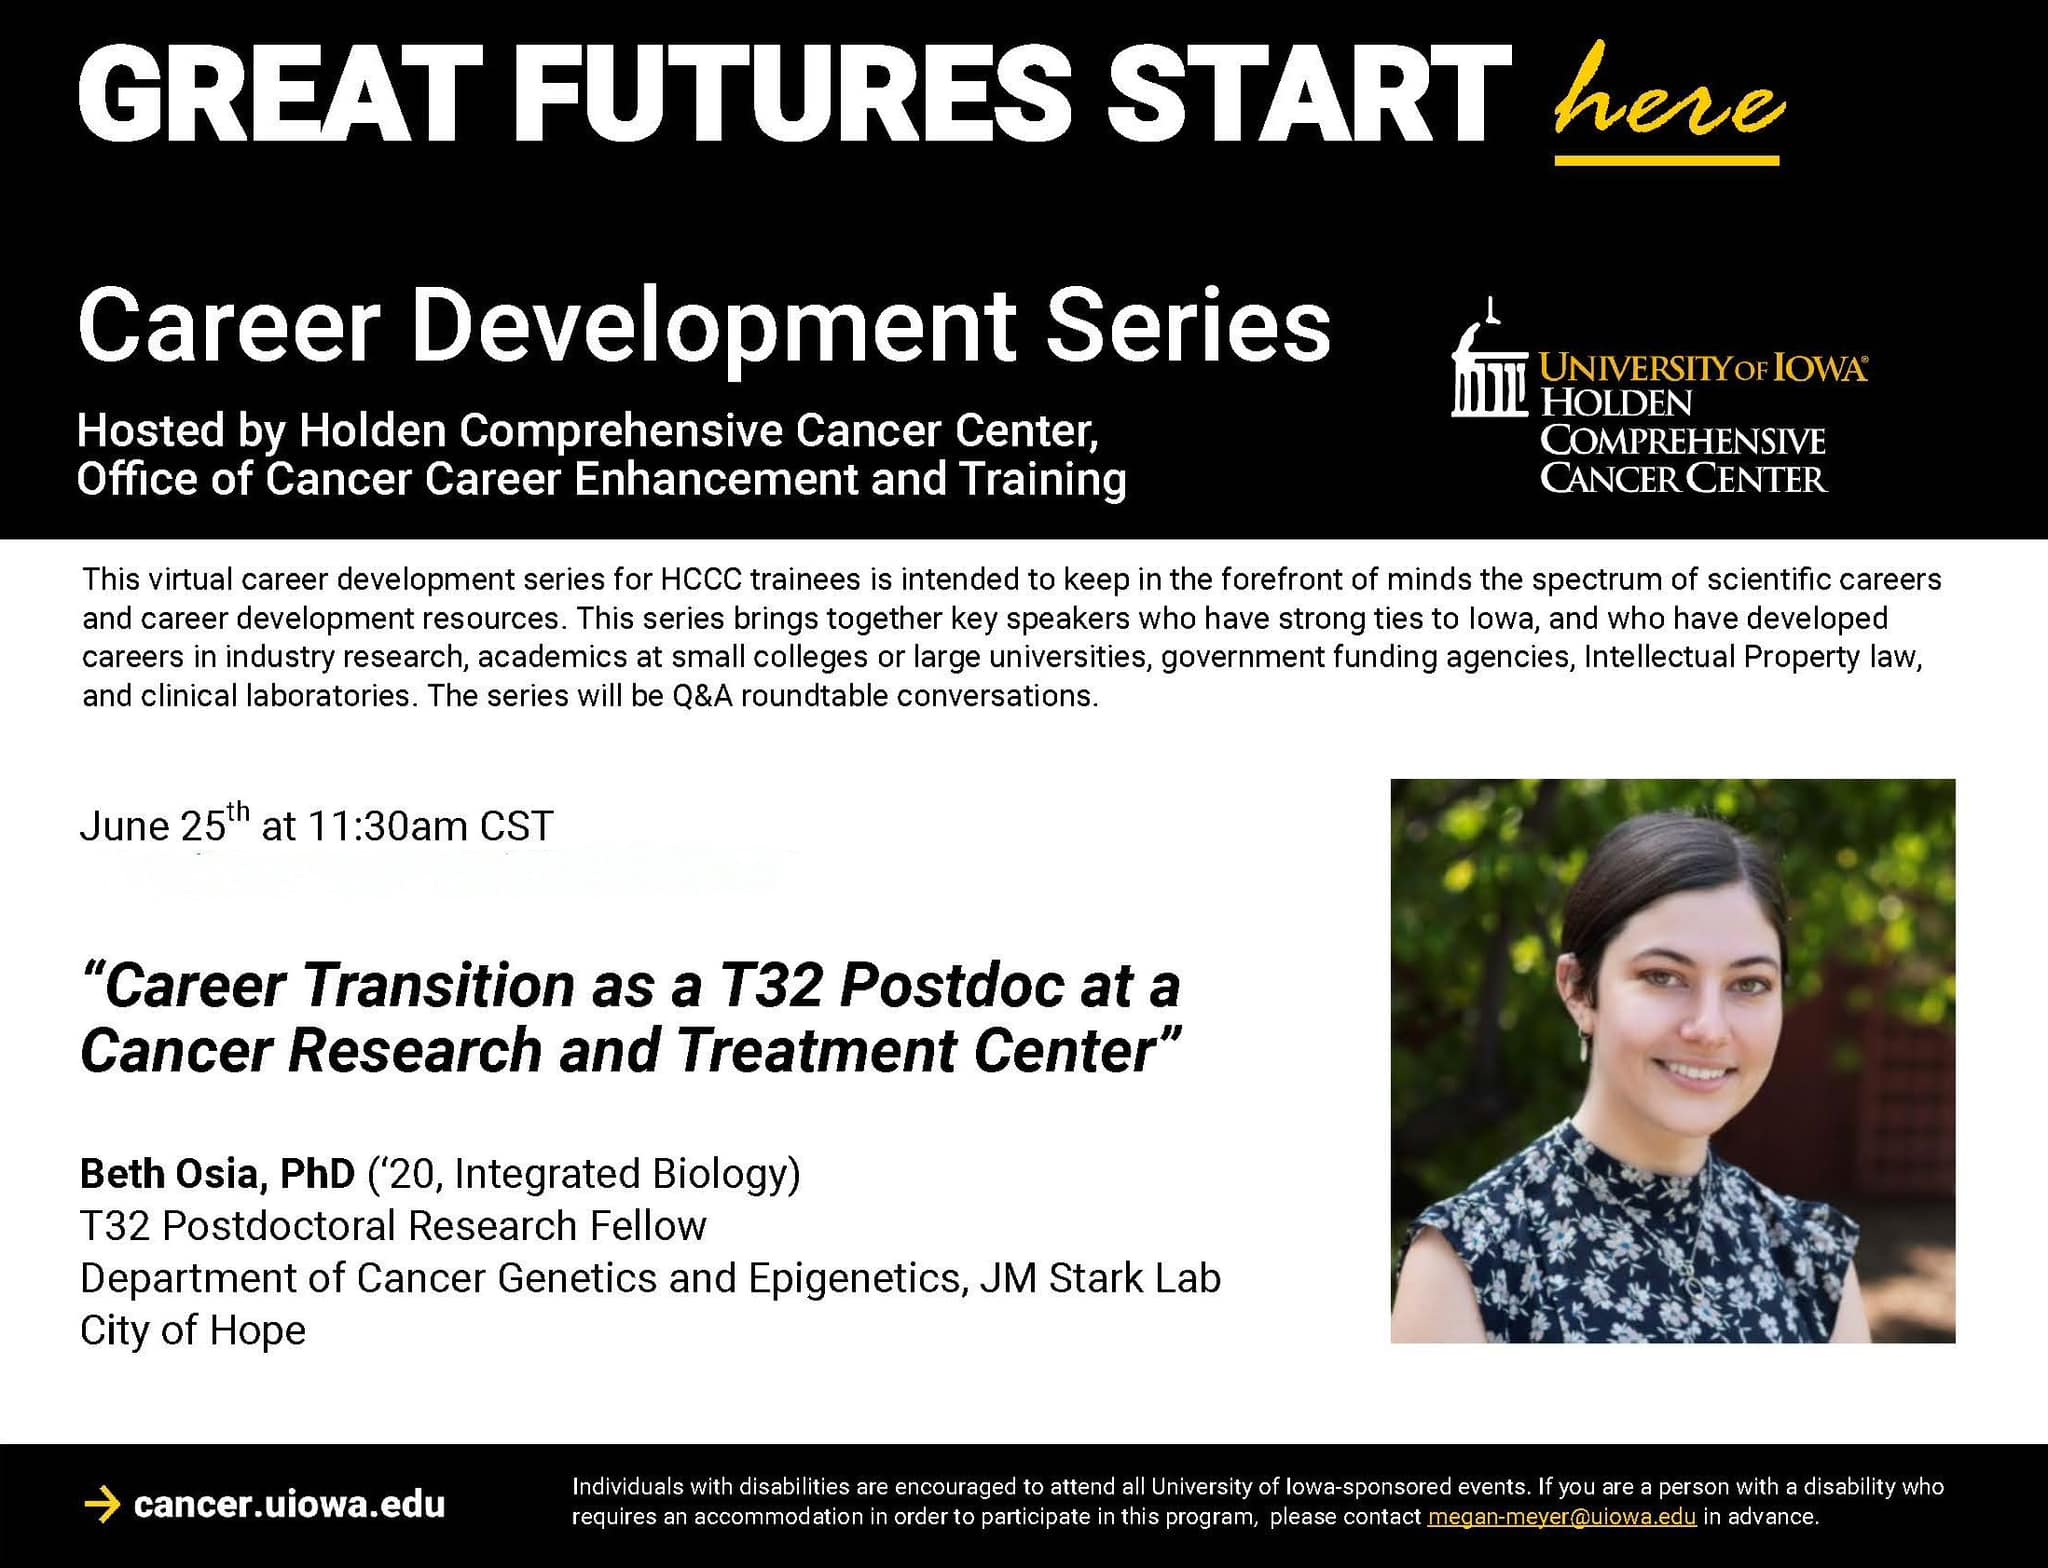 Career Transition as a T32 Postdoc at a Cancer Research and Treatment Center promotional image